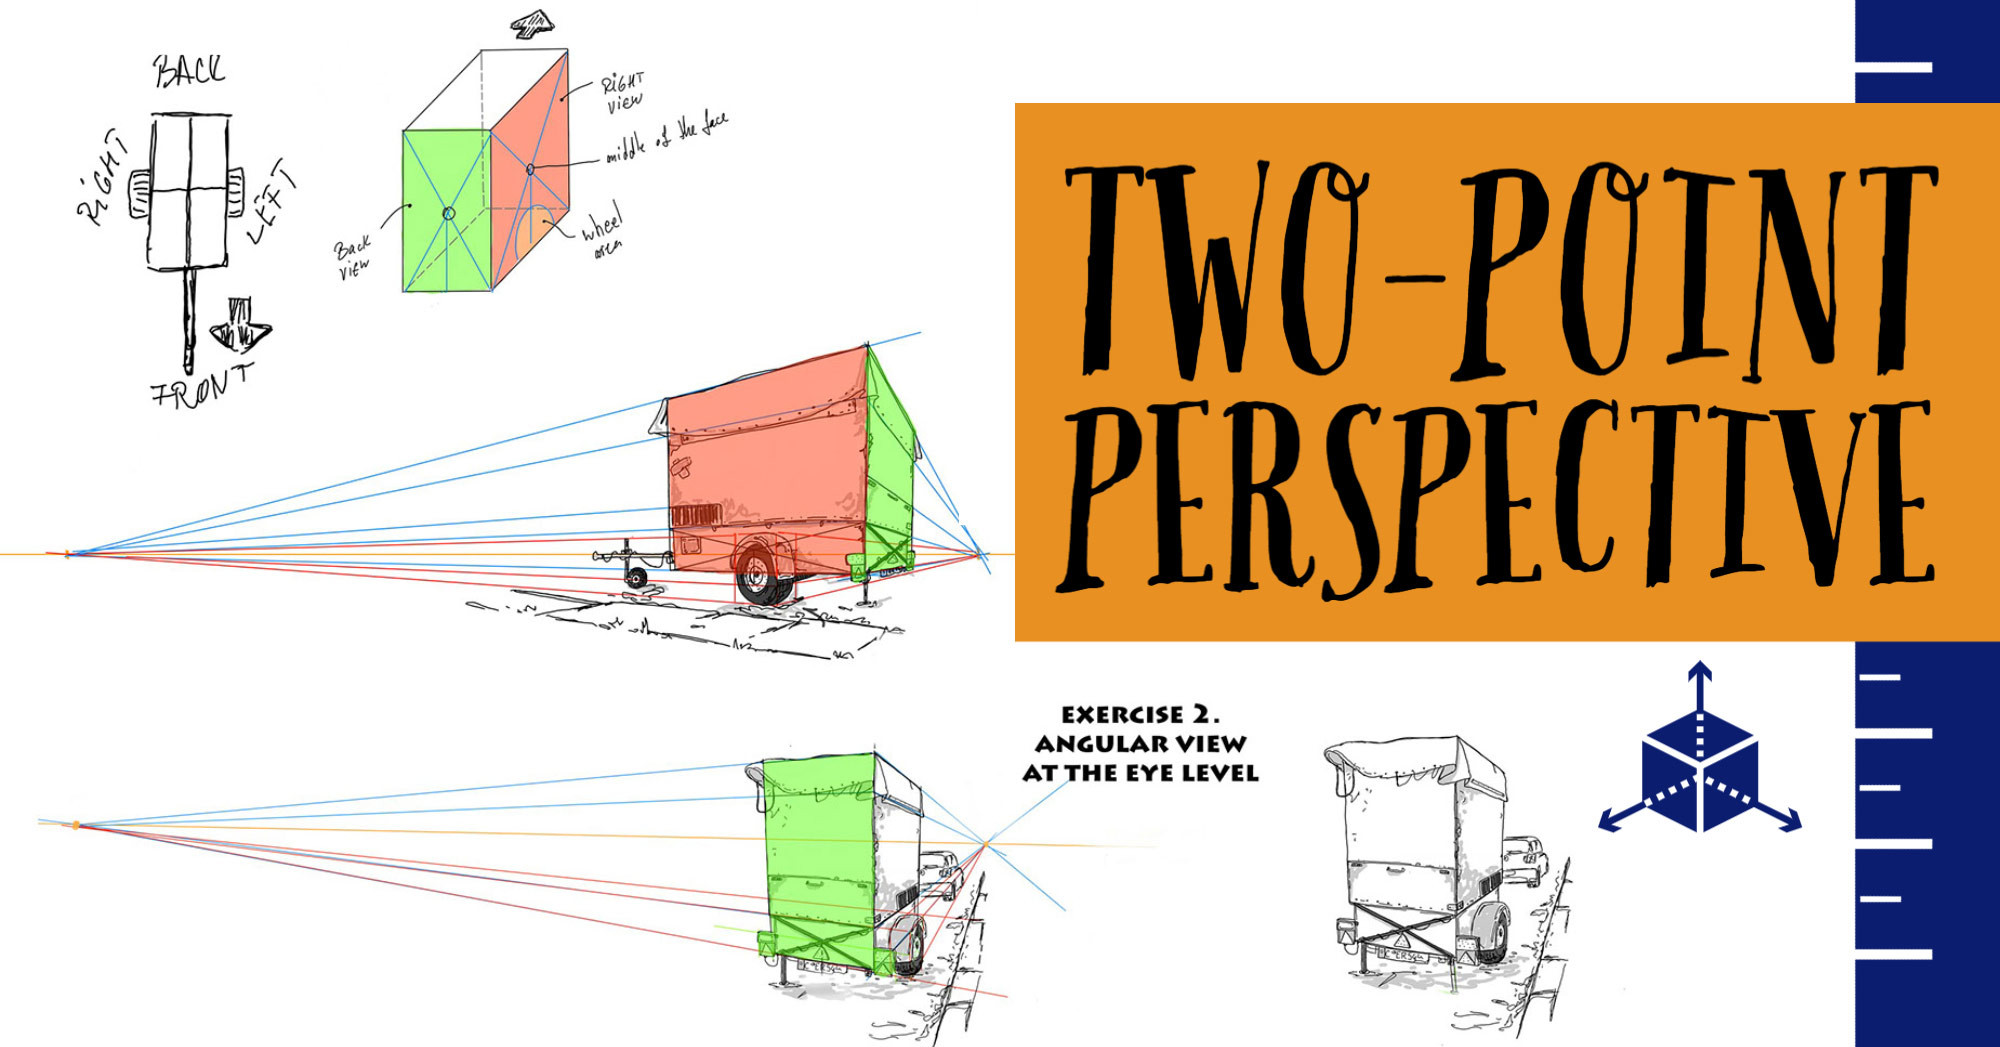 Article - Perspective Drawing Part 2. Two-Point Perspective https://www.cristinateachingart.com/practical-guide-in-perspective-drawing-part-3-two-point-perspective-drawing/